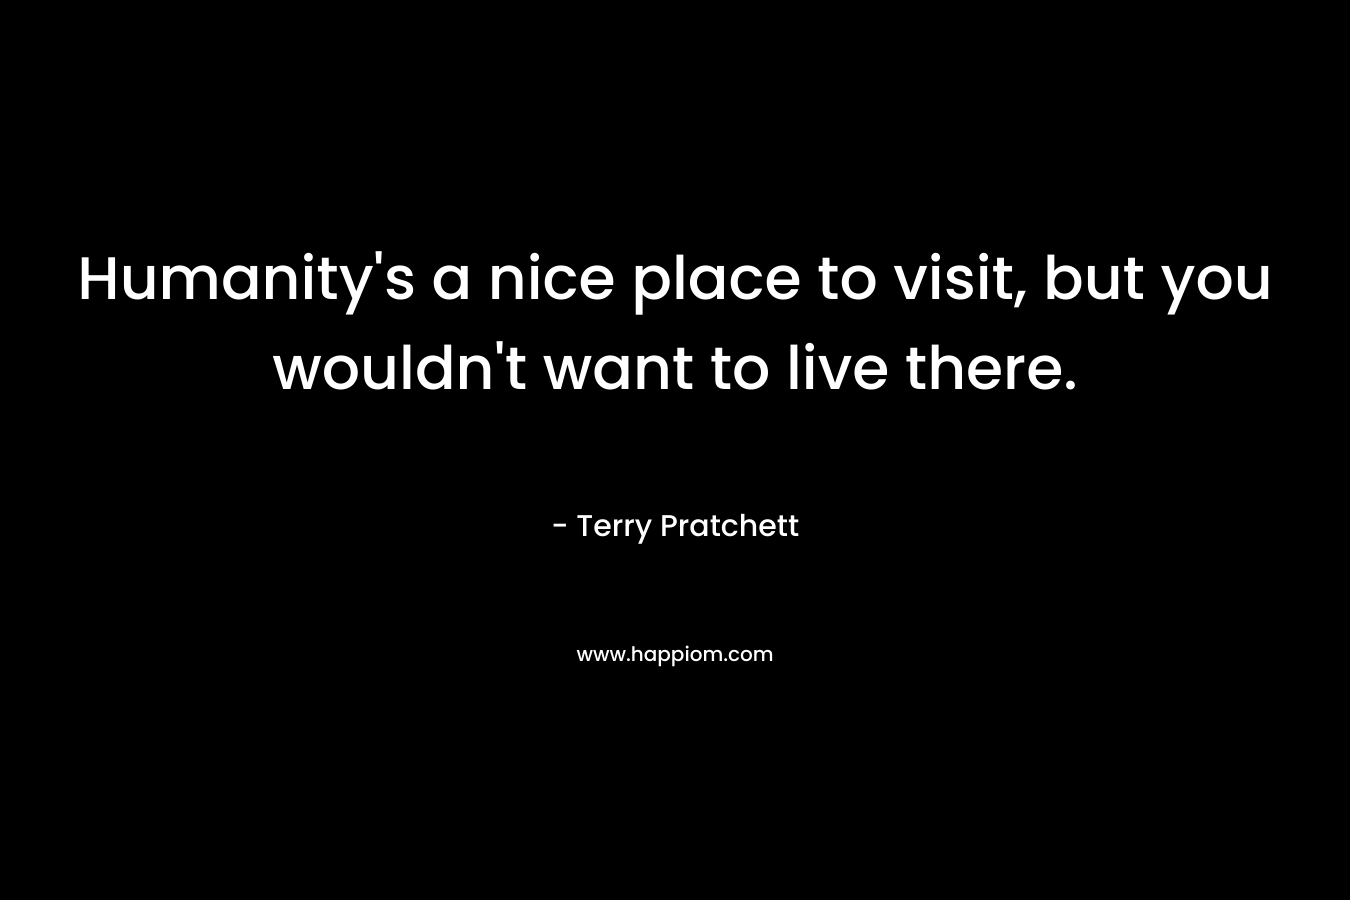 Humanity's a nice place to visit, but you wouldn't want to live there.